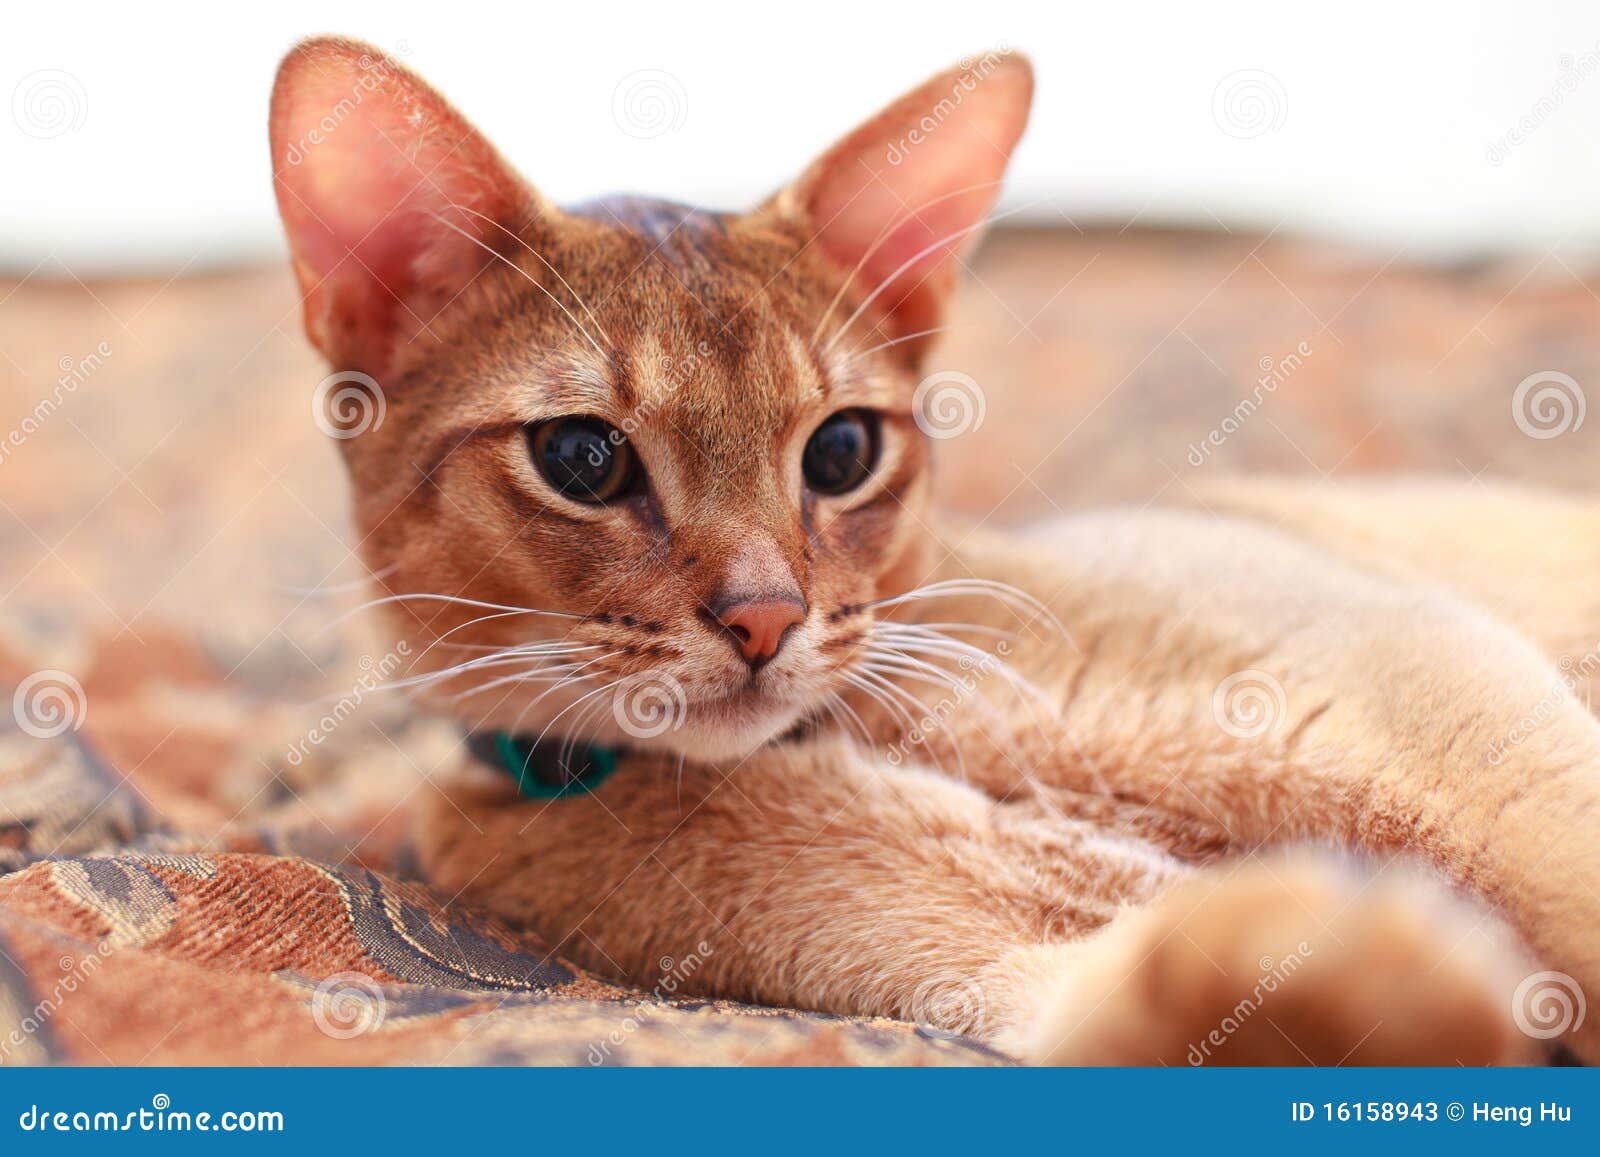 young light brown abyssinian cat kitten